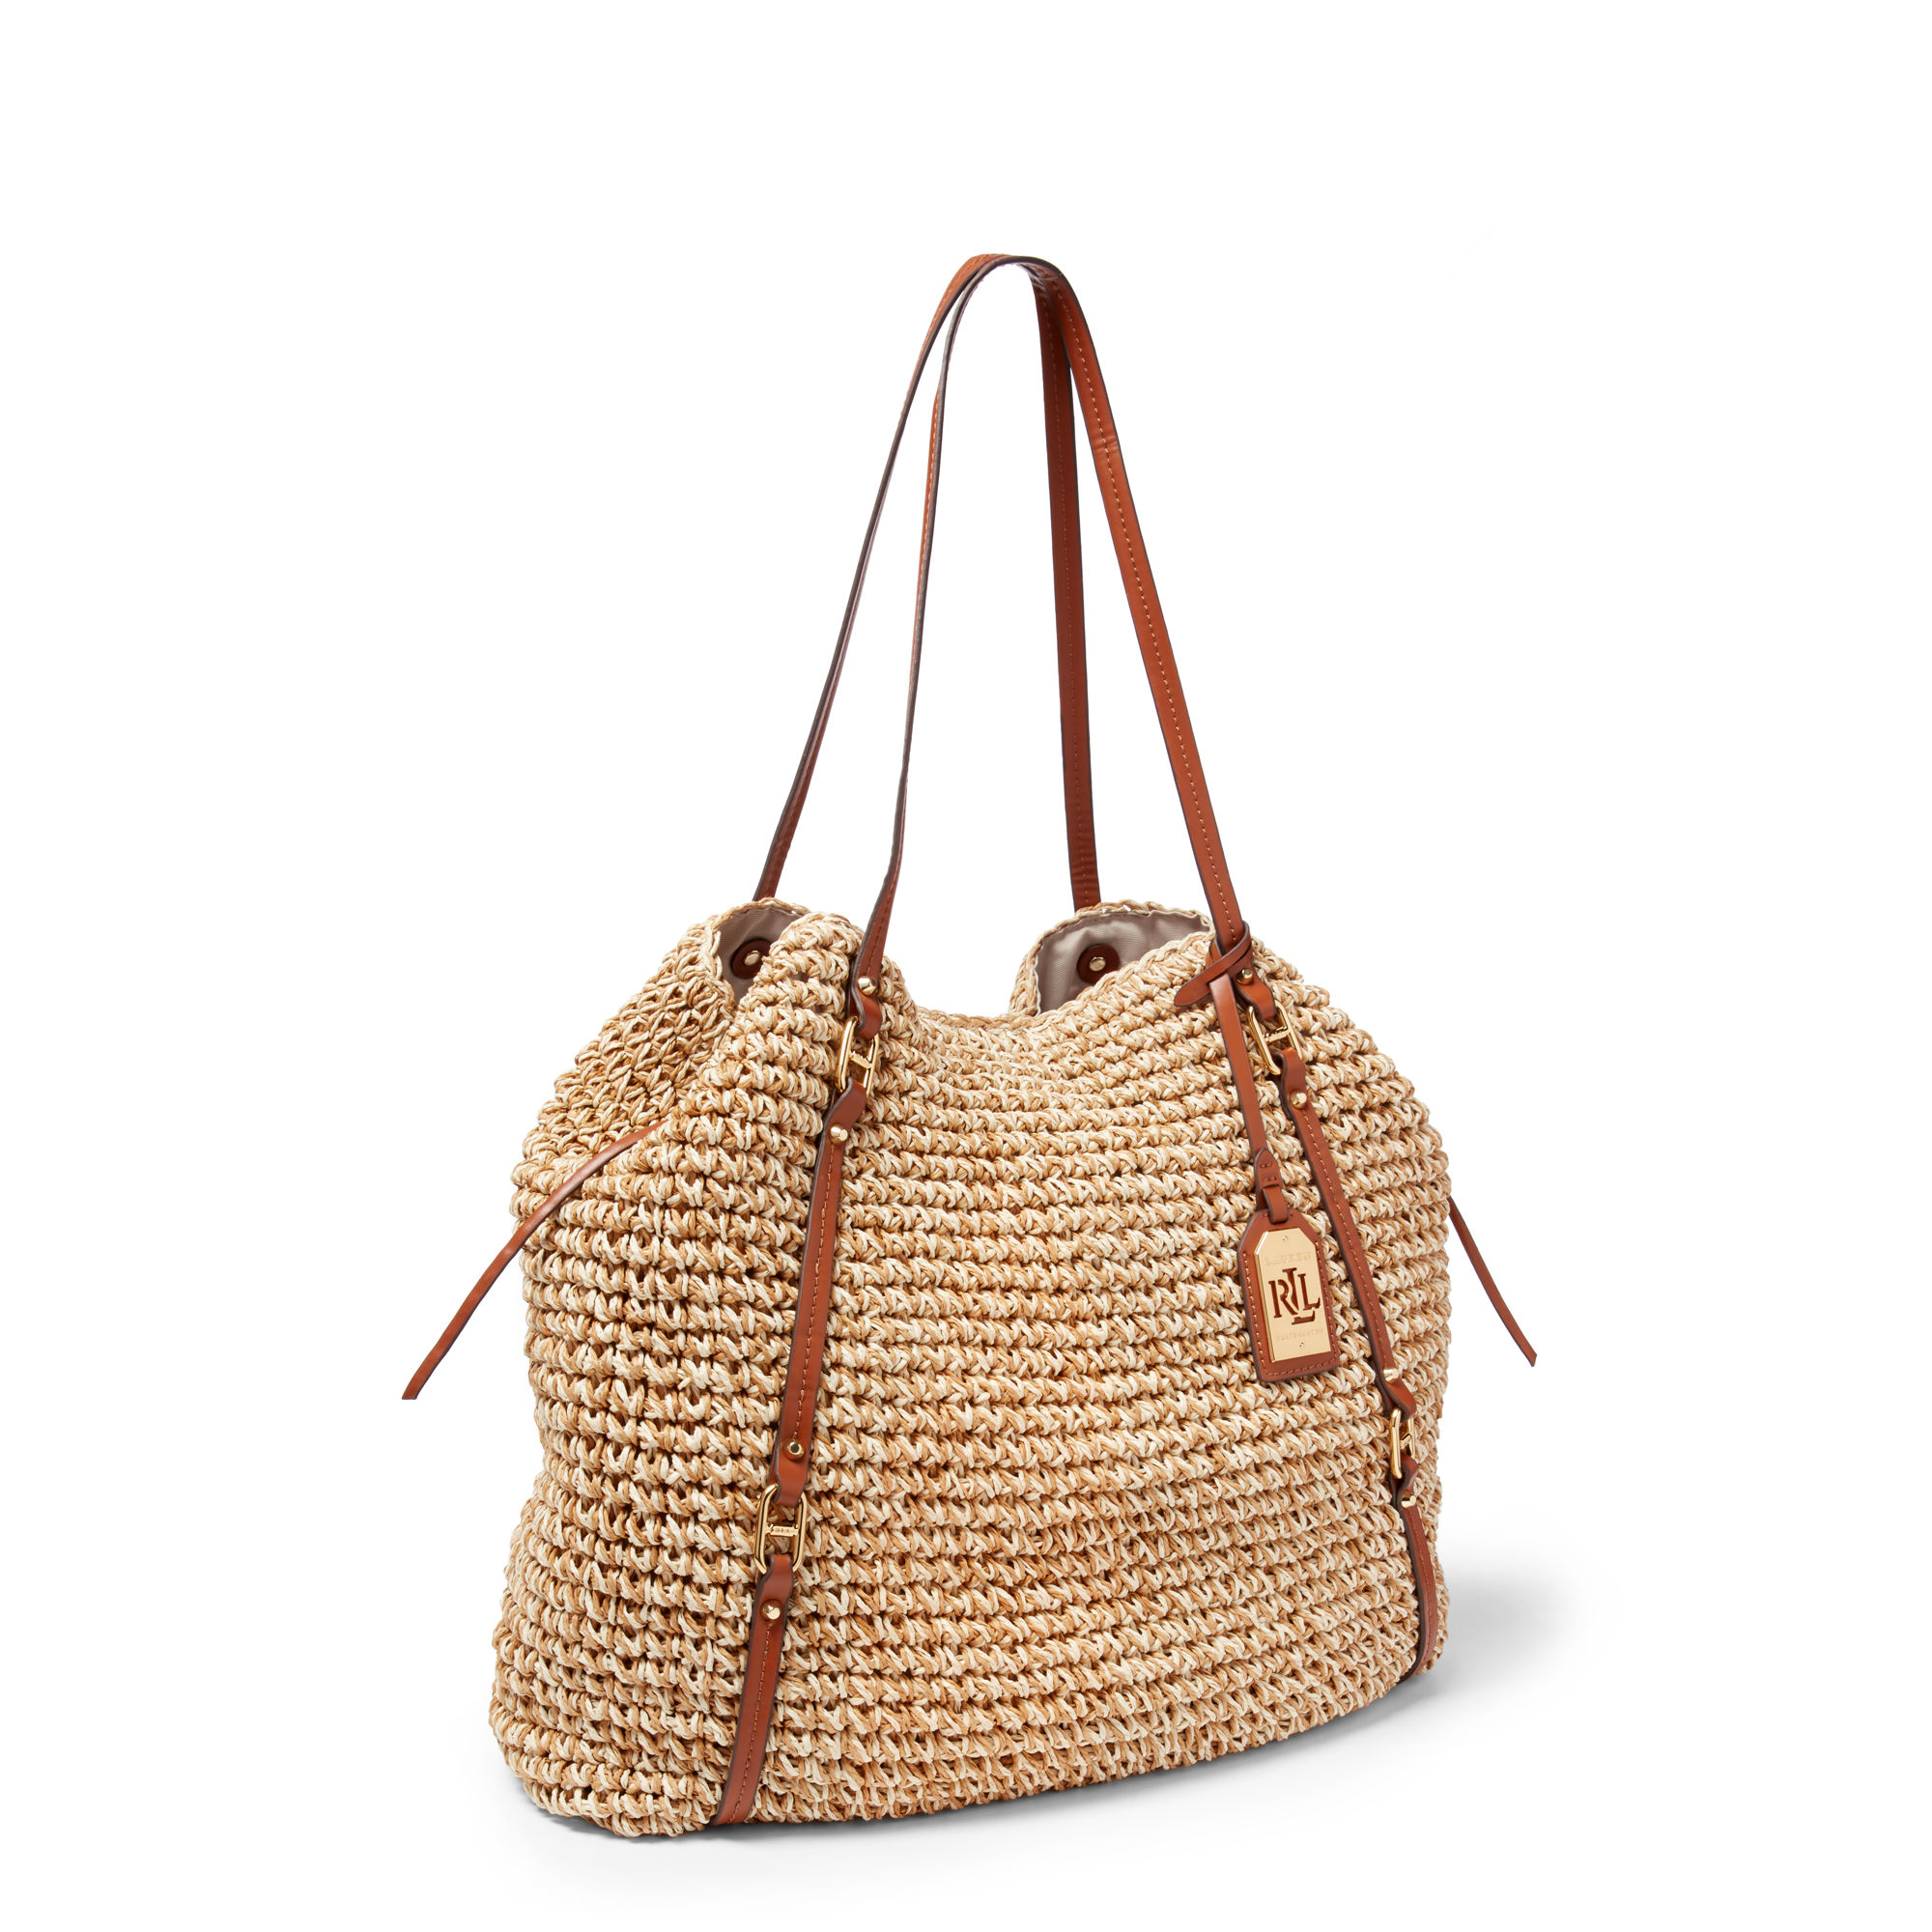 Lyst Ralph Lauren Goswell Straw Tote in Natural